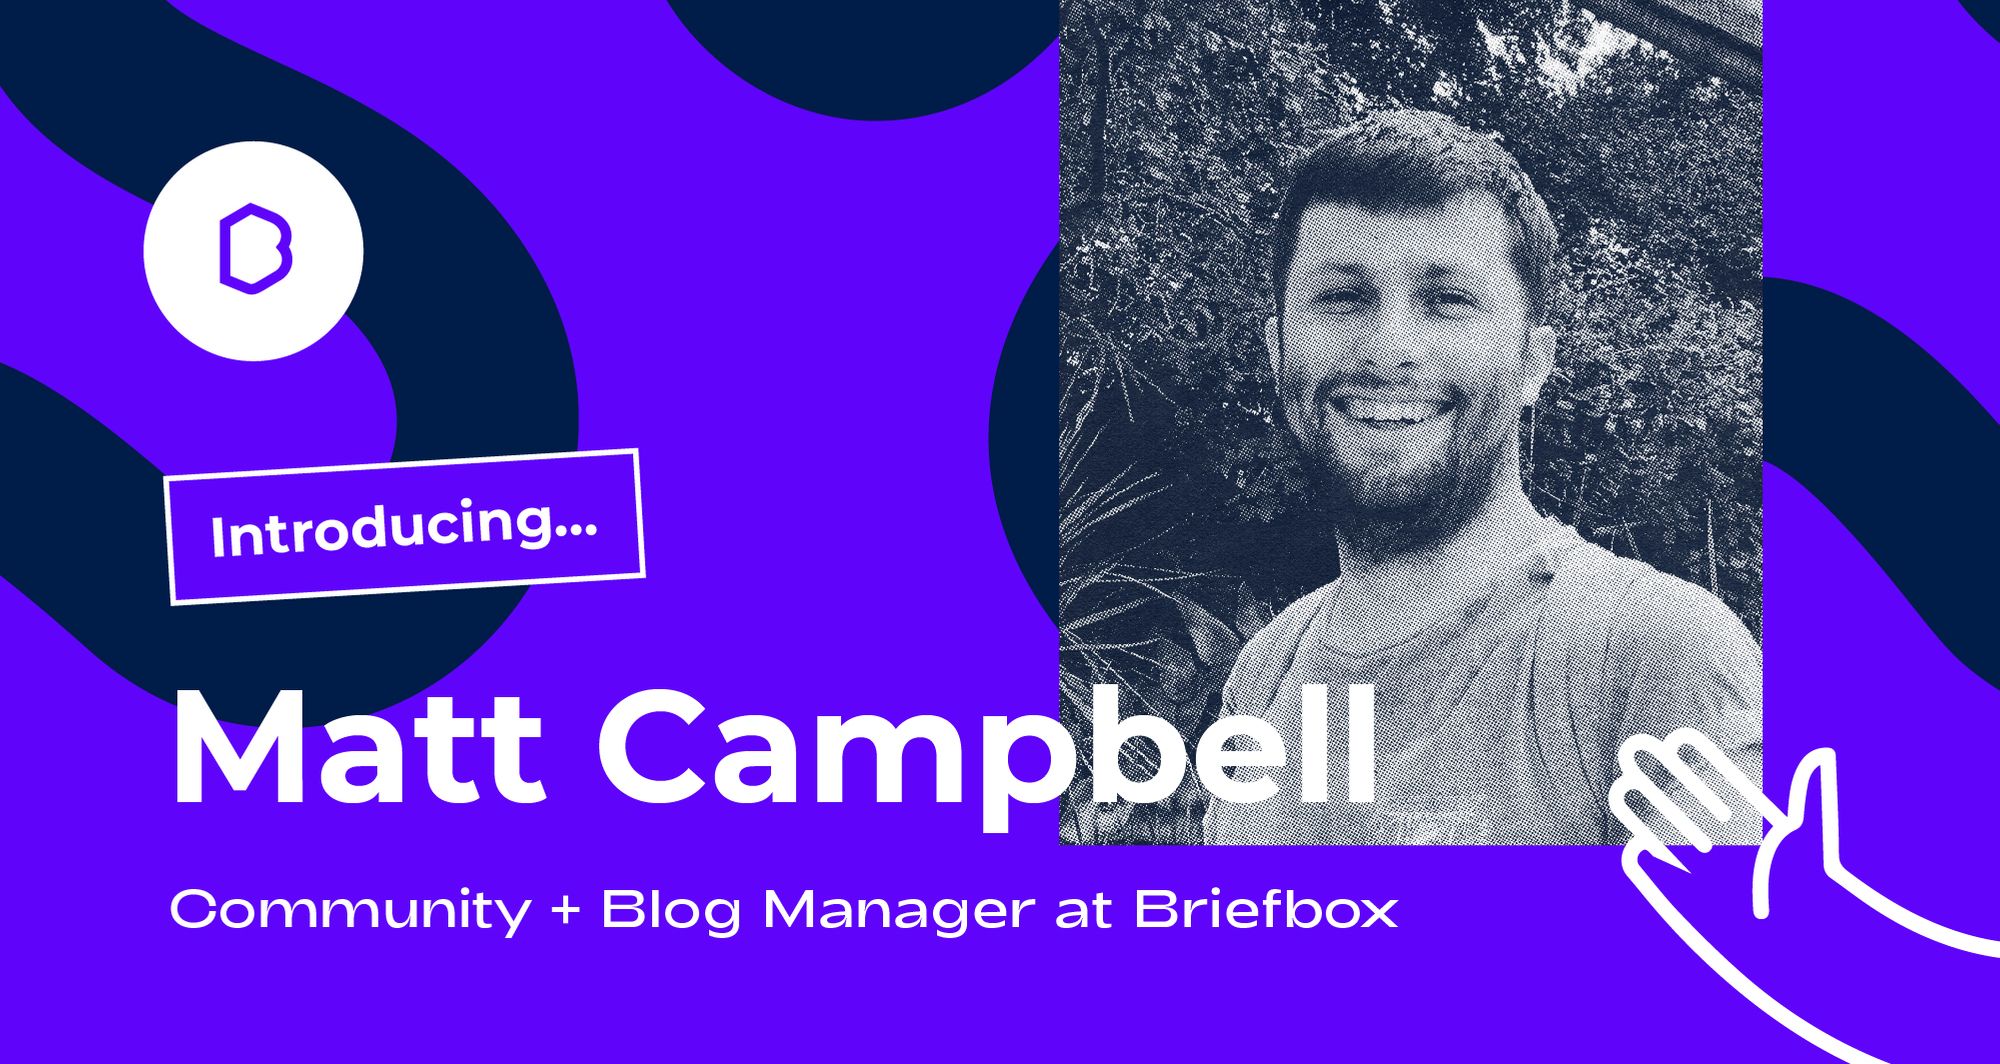 Introducing Matt Campbell - Our New Community & Blog Manager